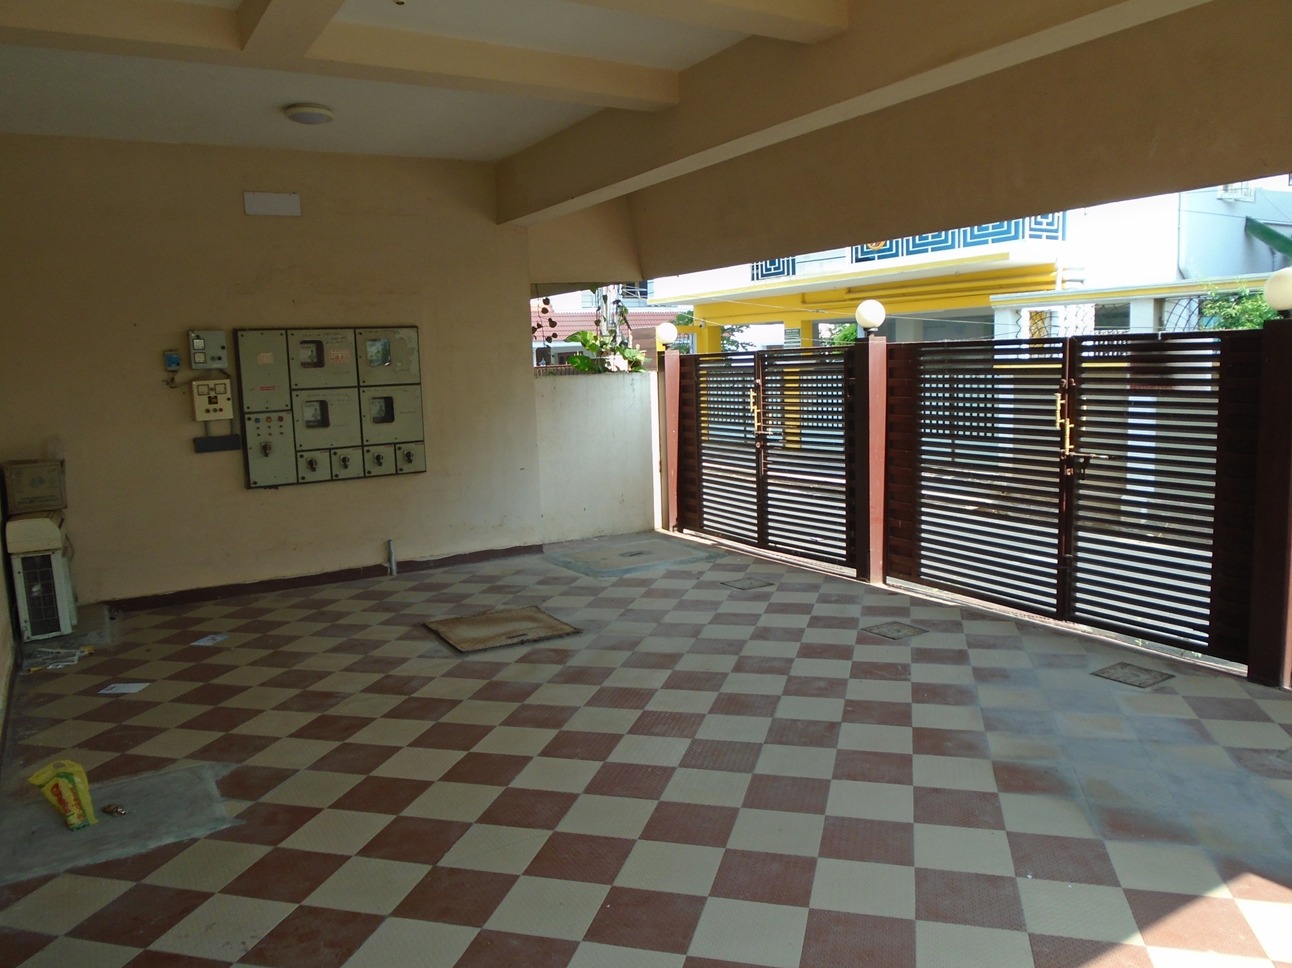 9937-for-sale-8BHK-Residential-Independent-House-Rs-25000000-in-Pondicherry-Town-Pondicherry-City-Puducherry